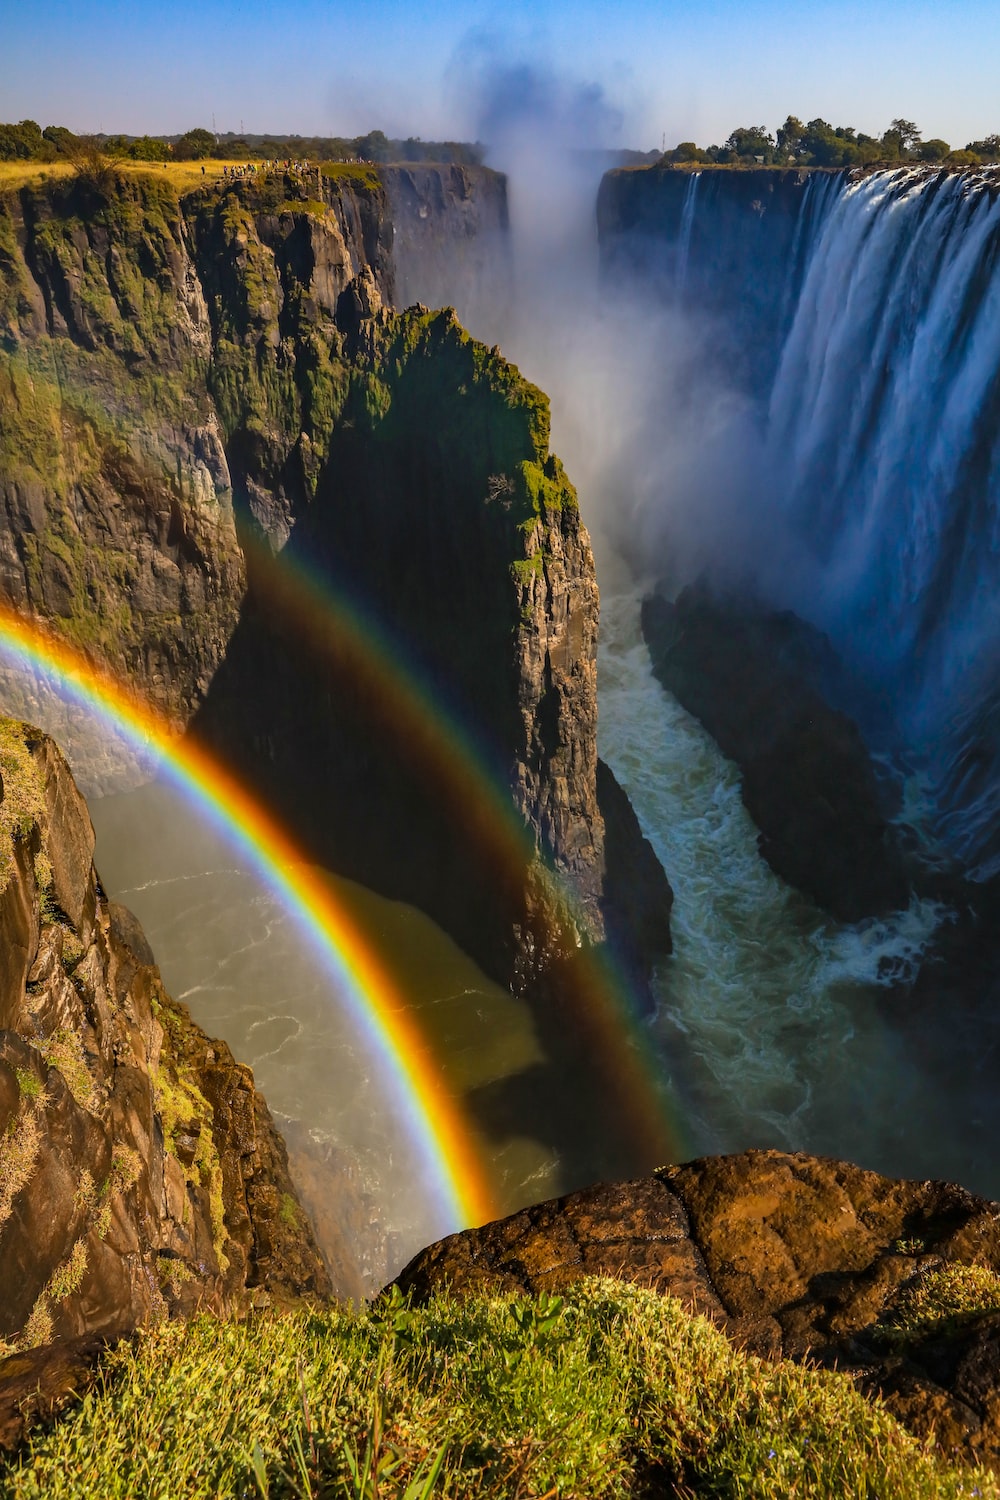 Victoria falls pictures download free images on